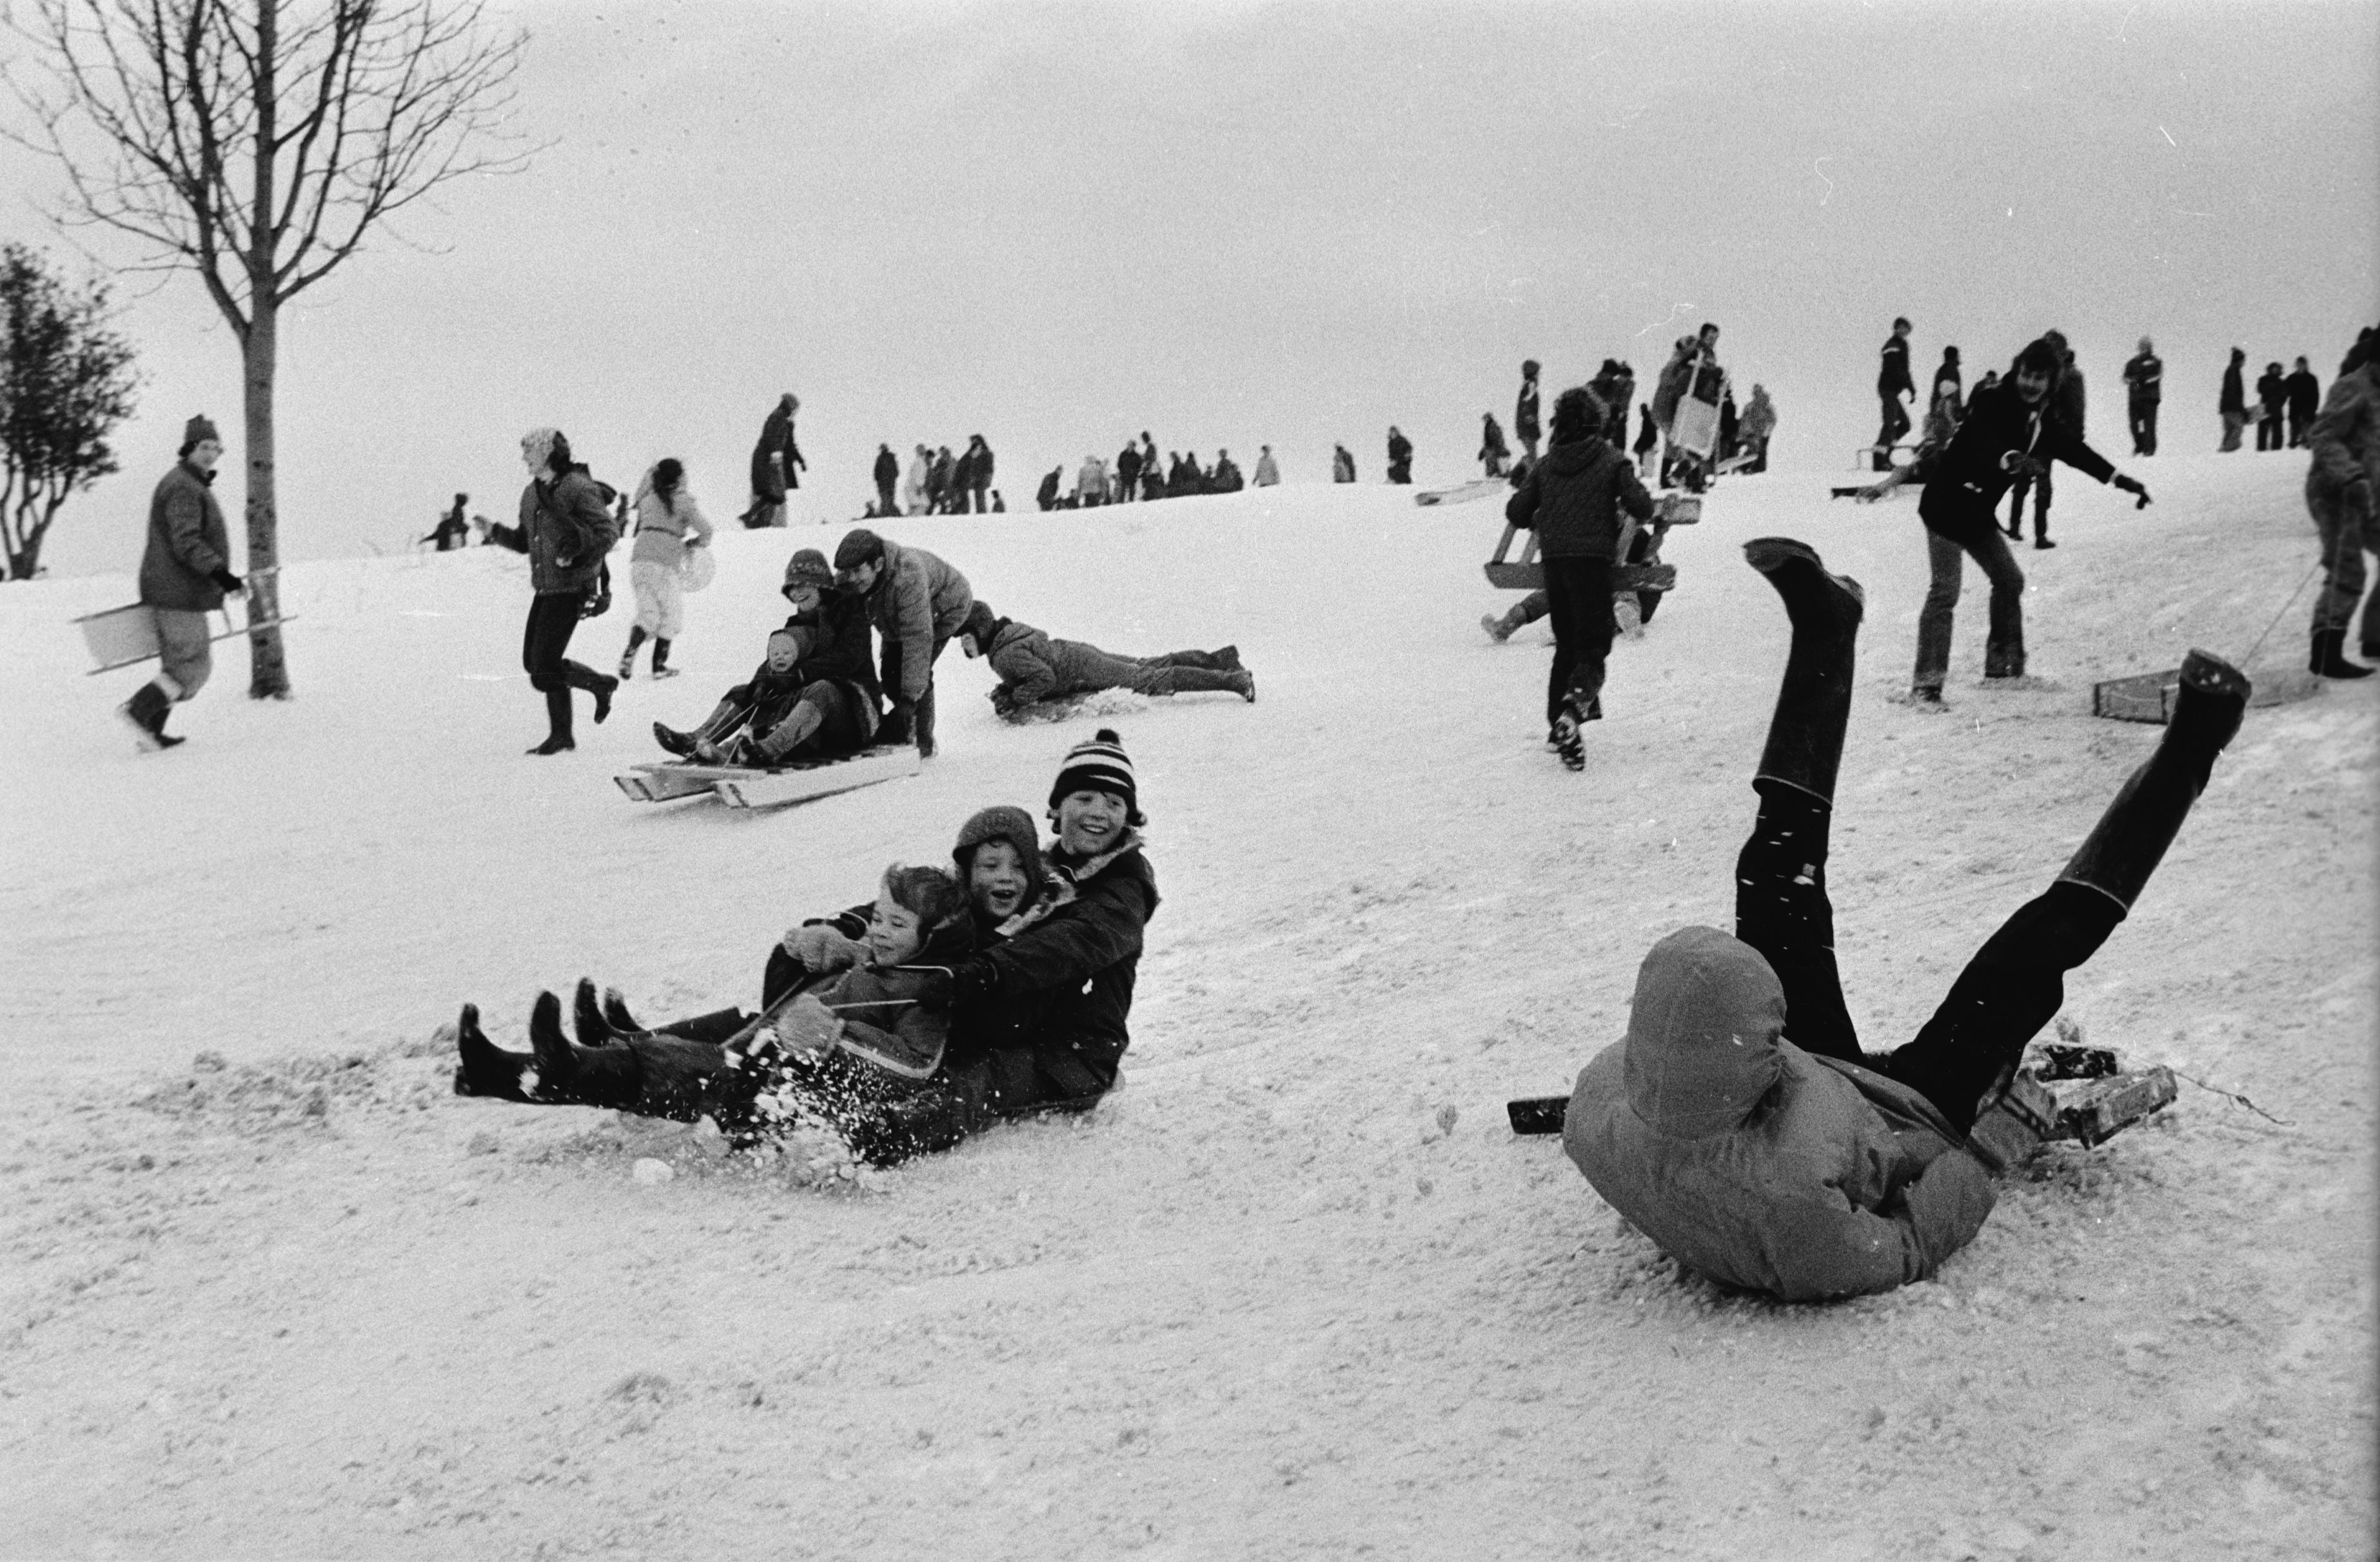 People cavort in the snow at Lyndhurst Hill, Southampton